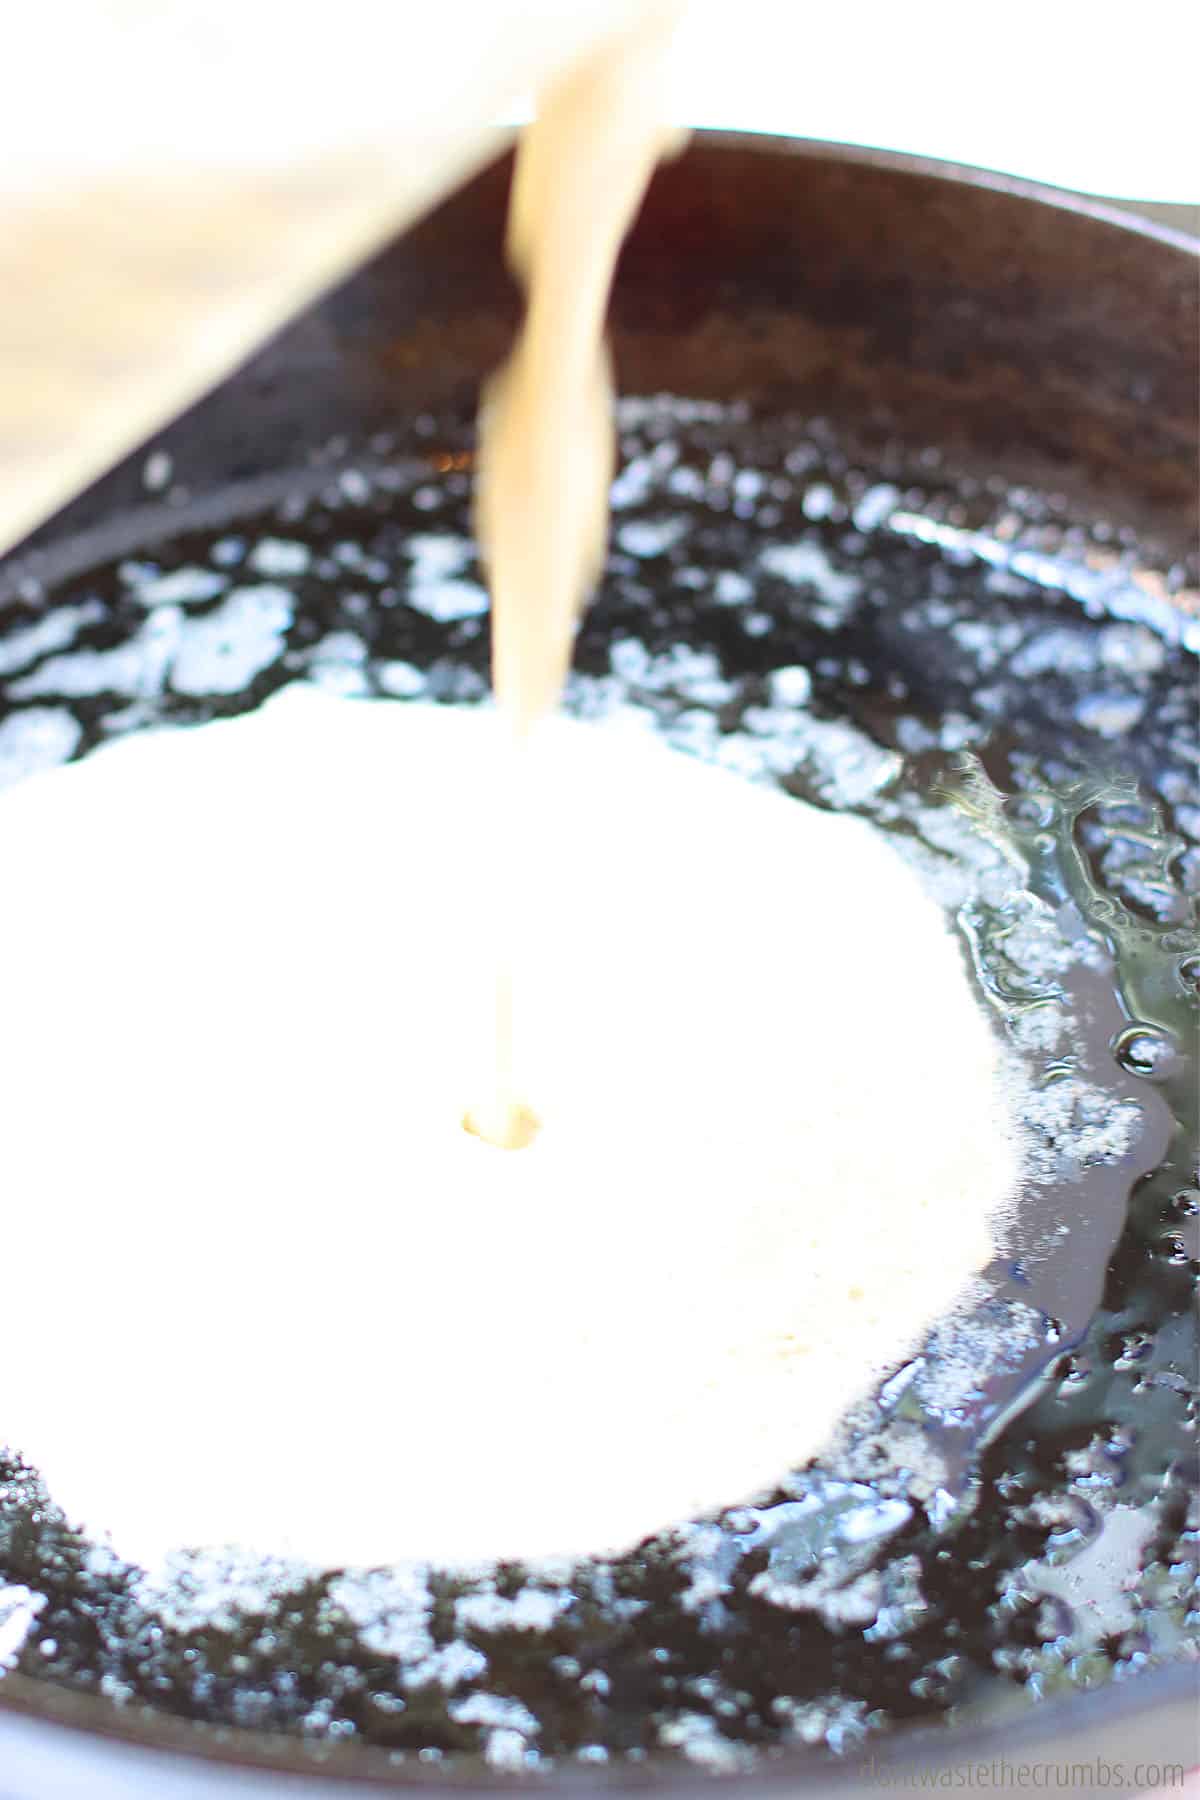 Pour the cornbread batter into the hot, greased cast iron skillet